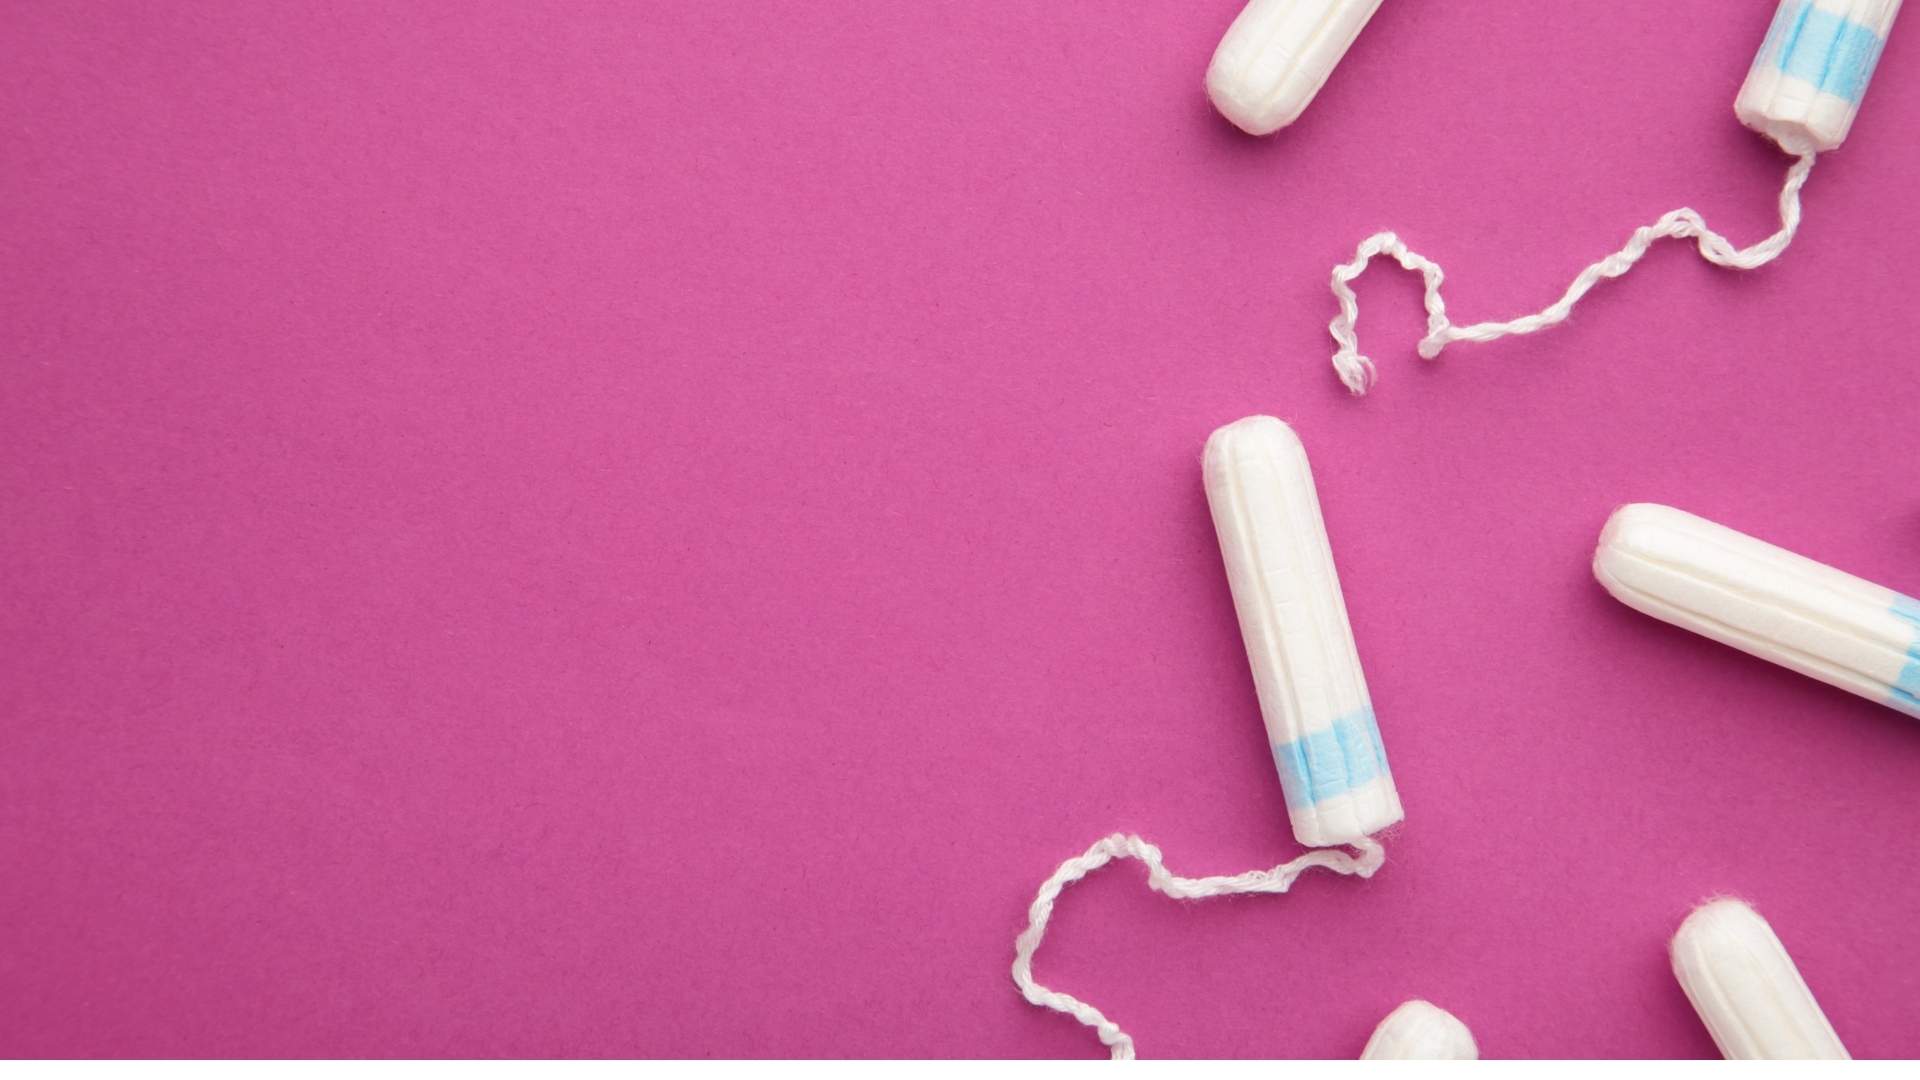 What Are the Pros and Cons of Wearing Tampons? - ONDR